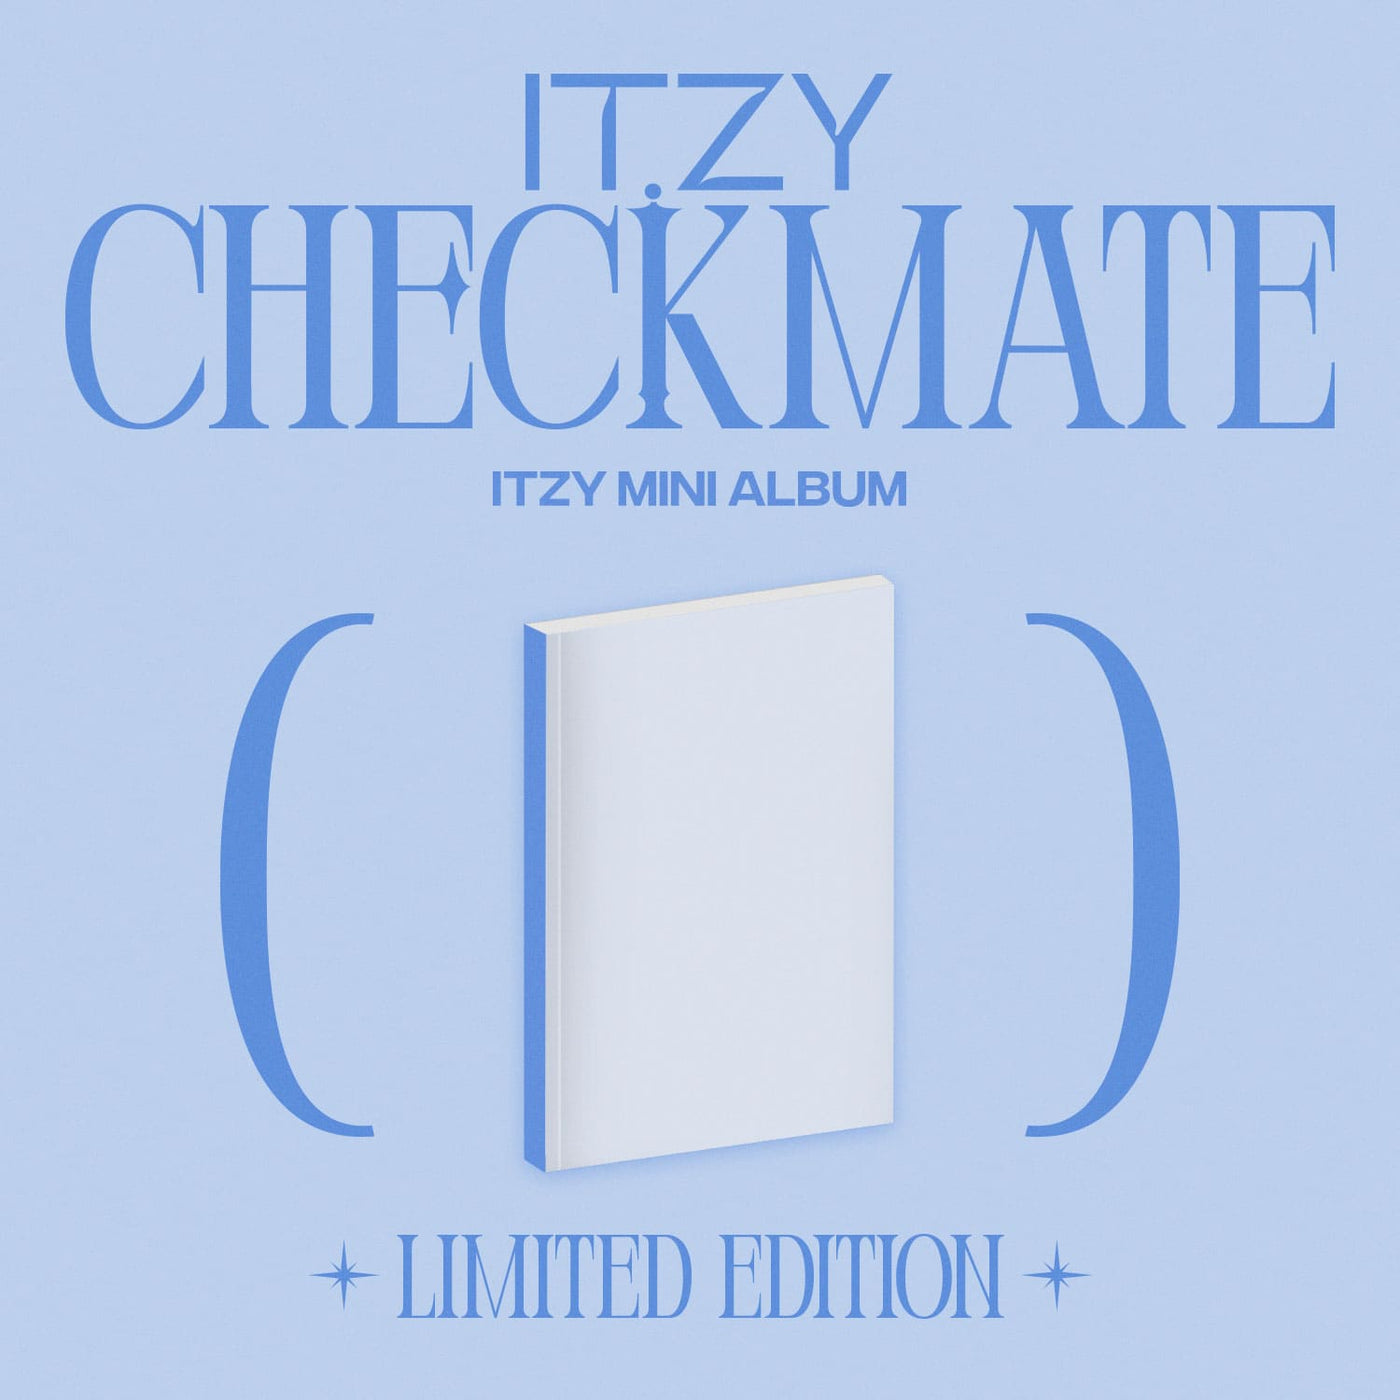 ITZY CHECKMATE (LIMITED EDITION) 🇰🇷